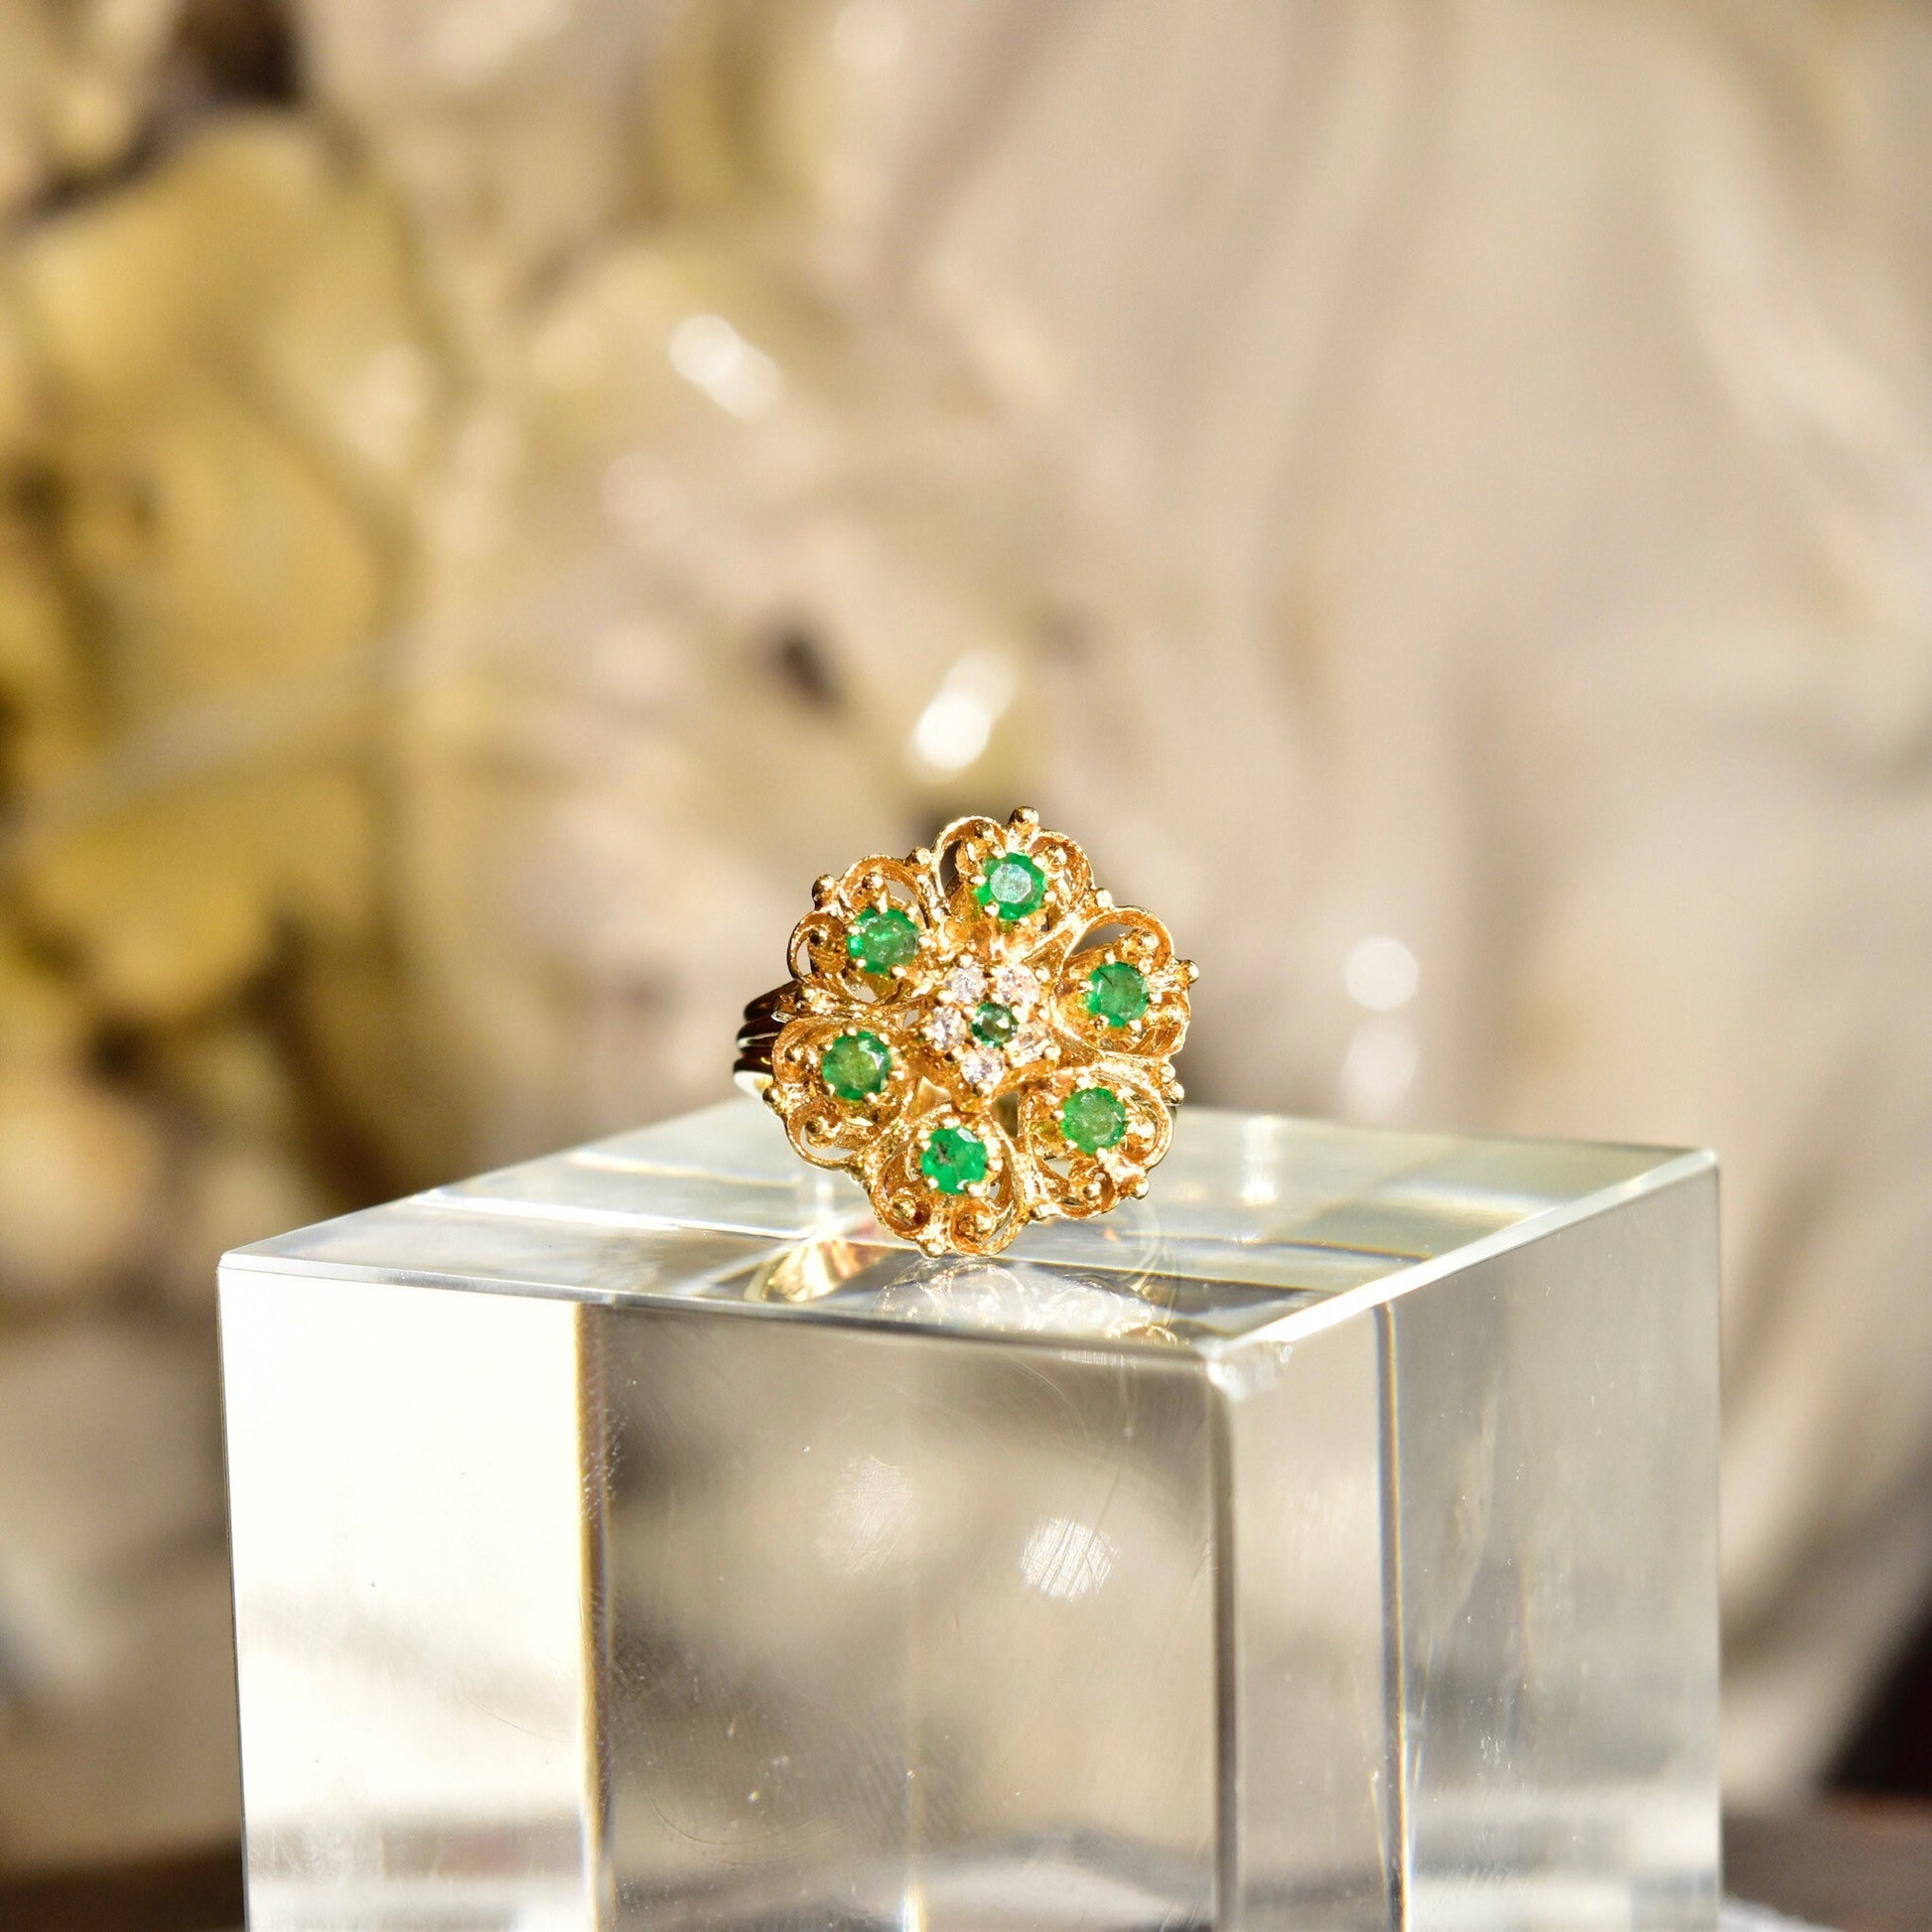 14K yellow gold emerald and diamond cluster cocktail ring in a floral dome design, displayed on a clear glass pedestal against a textured beige background.